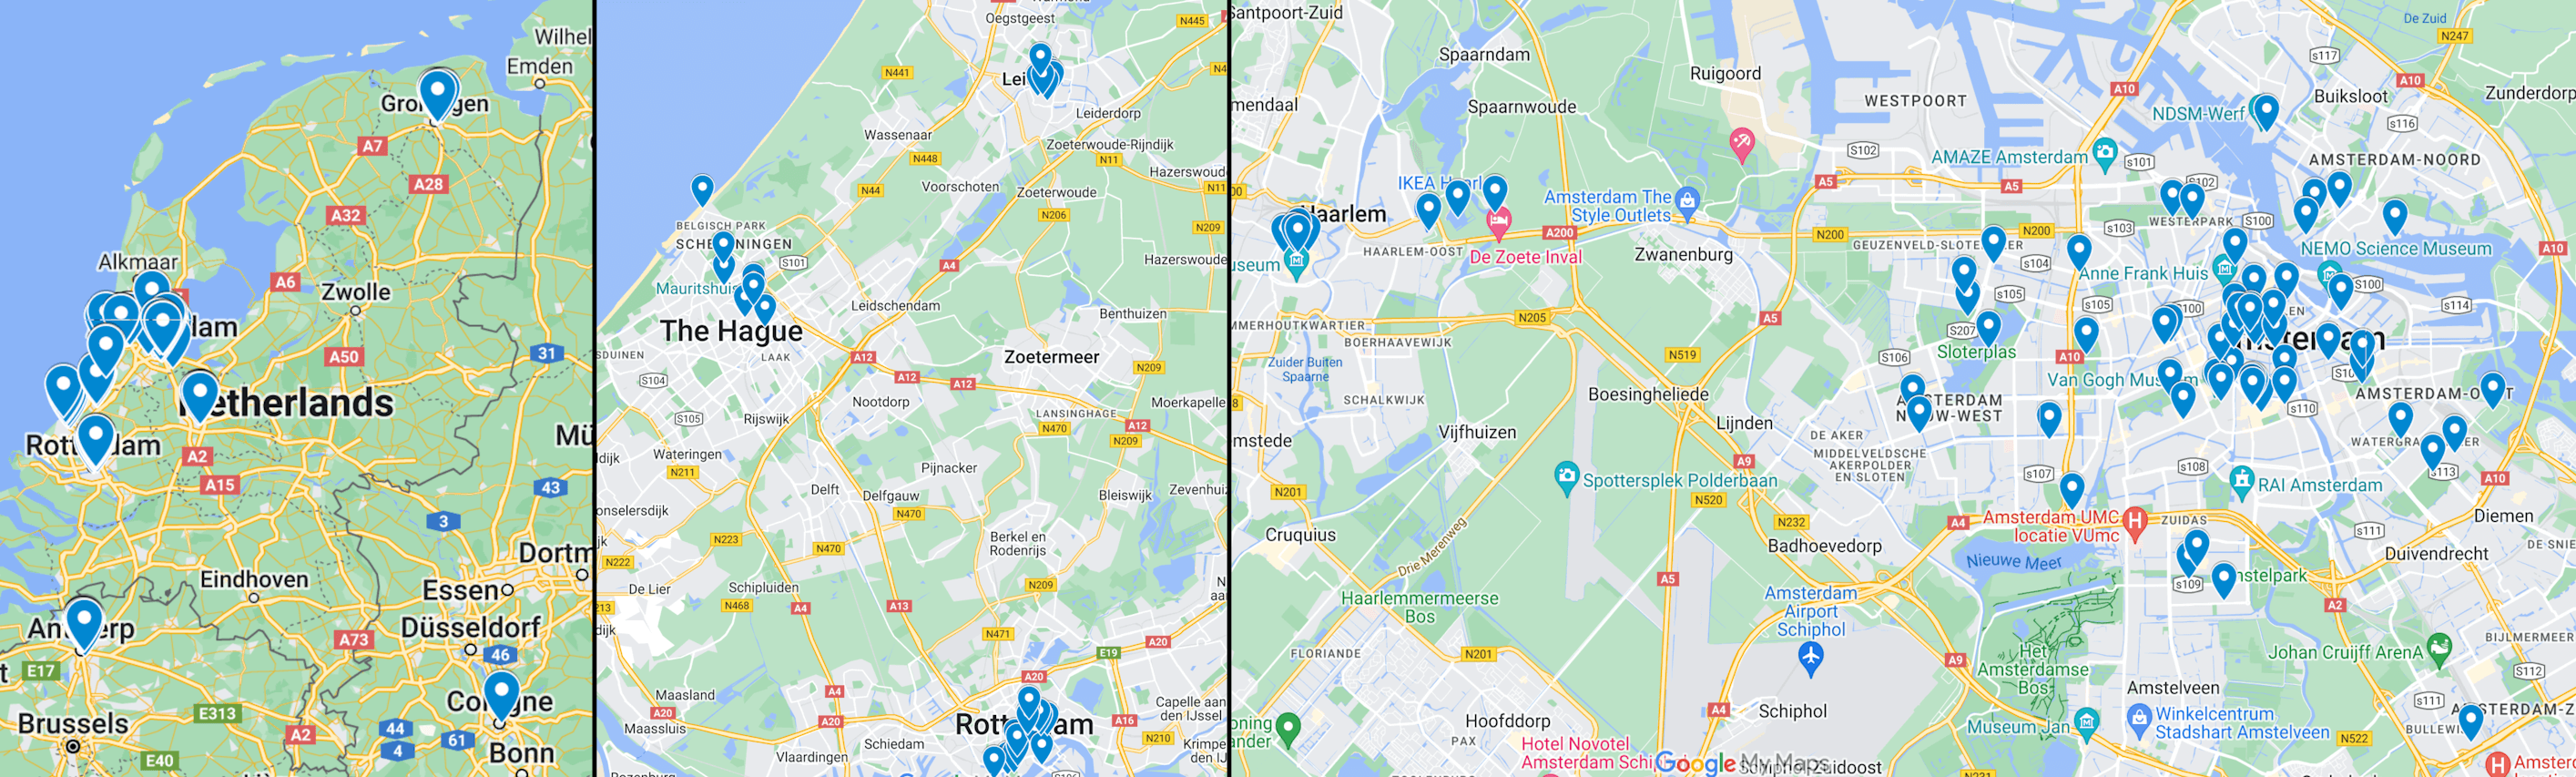 A map with all of the 'places' I visited during my time.